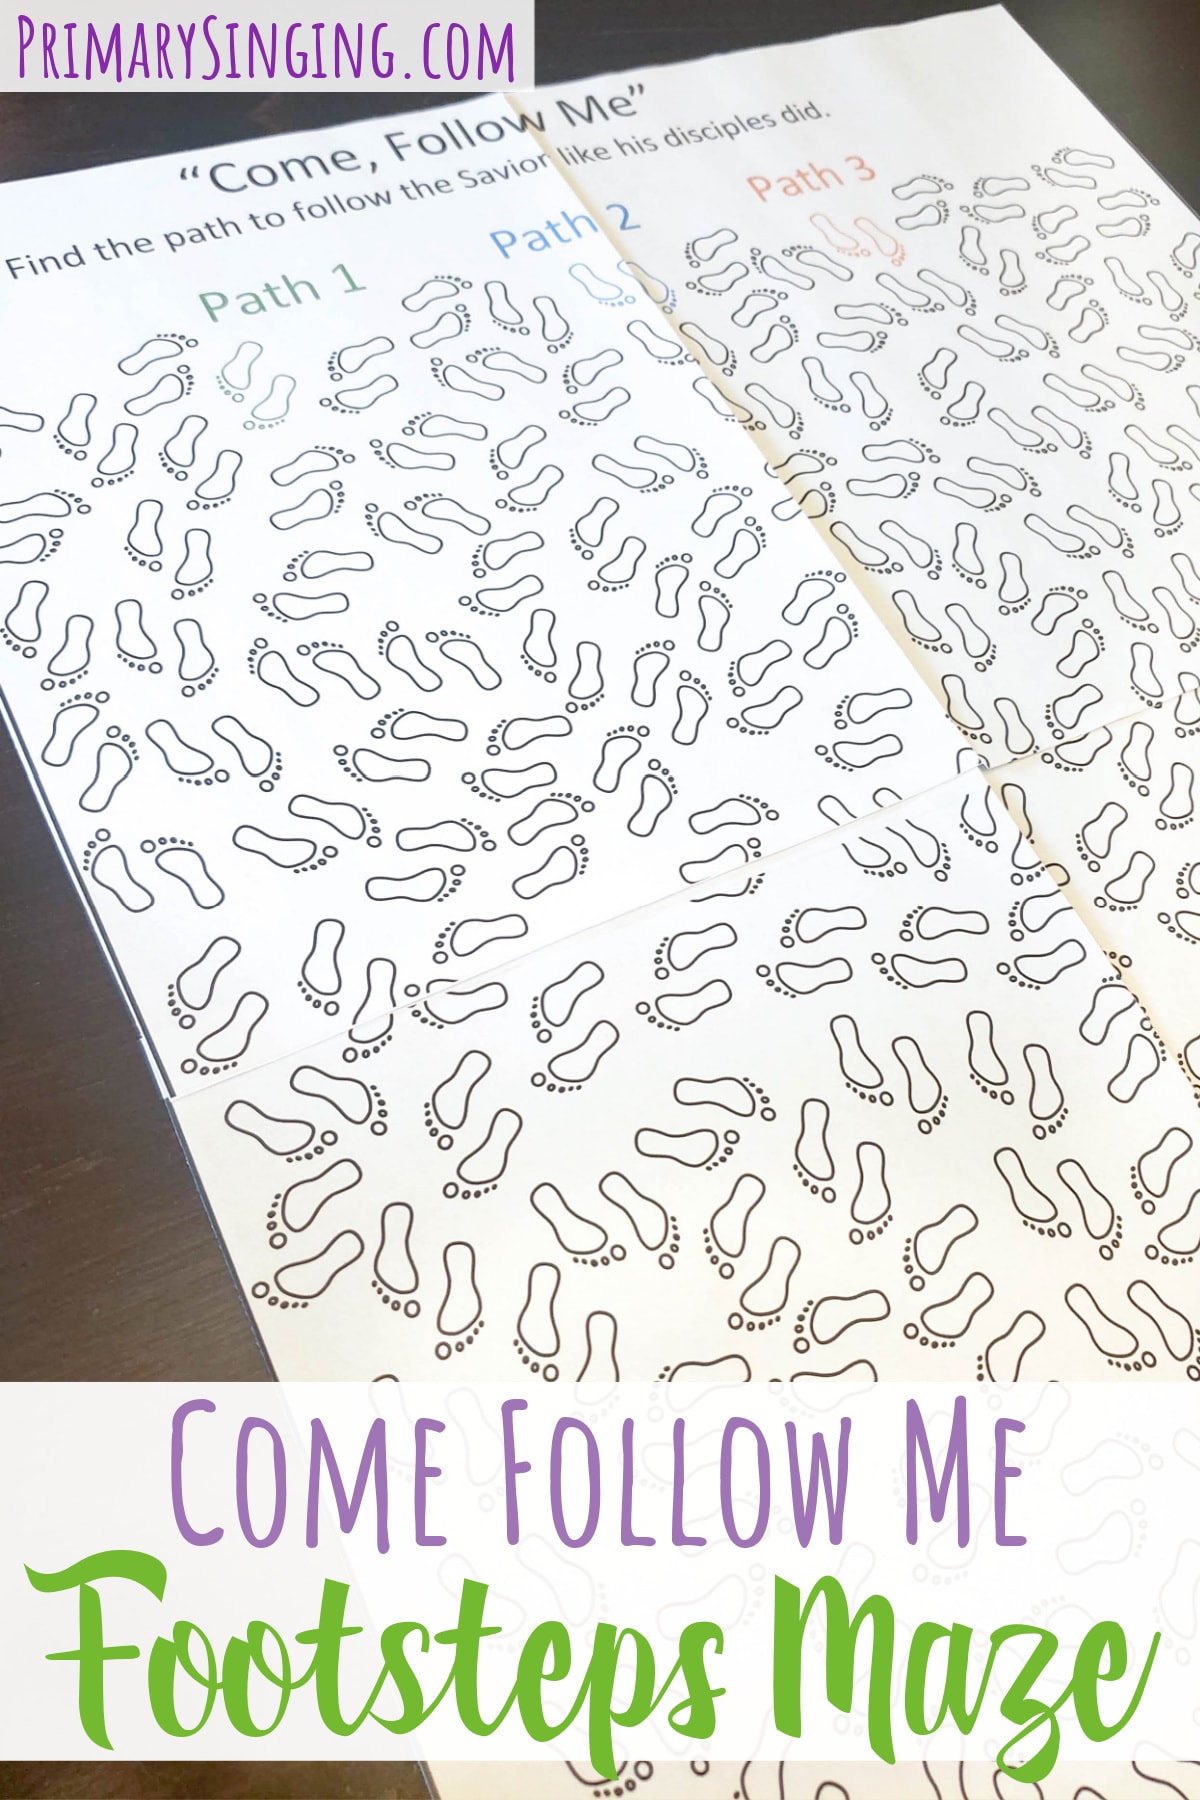 Grab this Come Follow Me footsteps maze to have a meaningful way to teach this song in Primary singing time! Includes printable song helps for LDS music leaders. Helps teach the meaningful lyrics "then let us in his footsteps tread" with an interactive activity or a 1-page printable maze option for individuals Come Follow Me study at home!